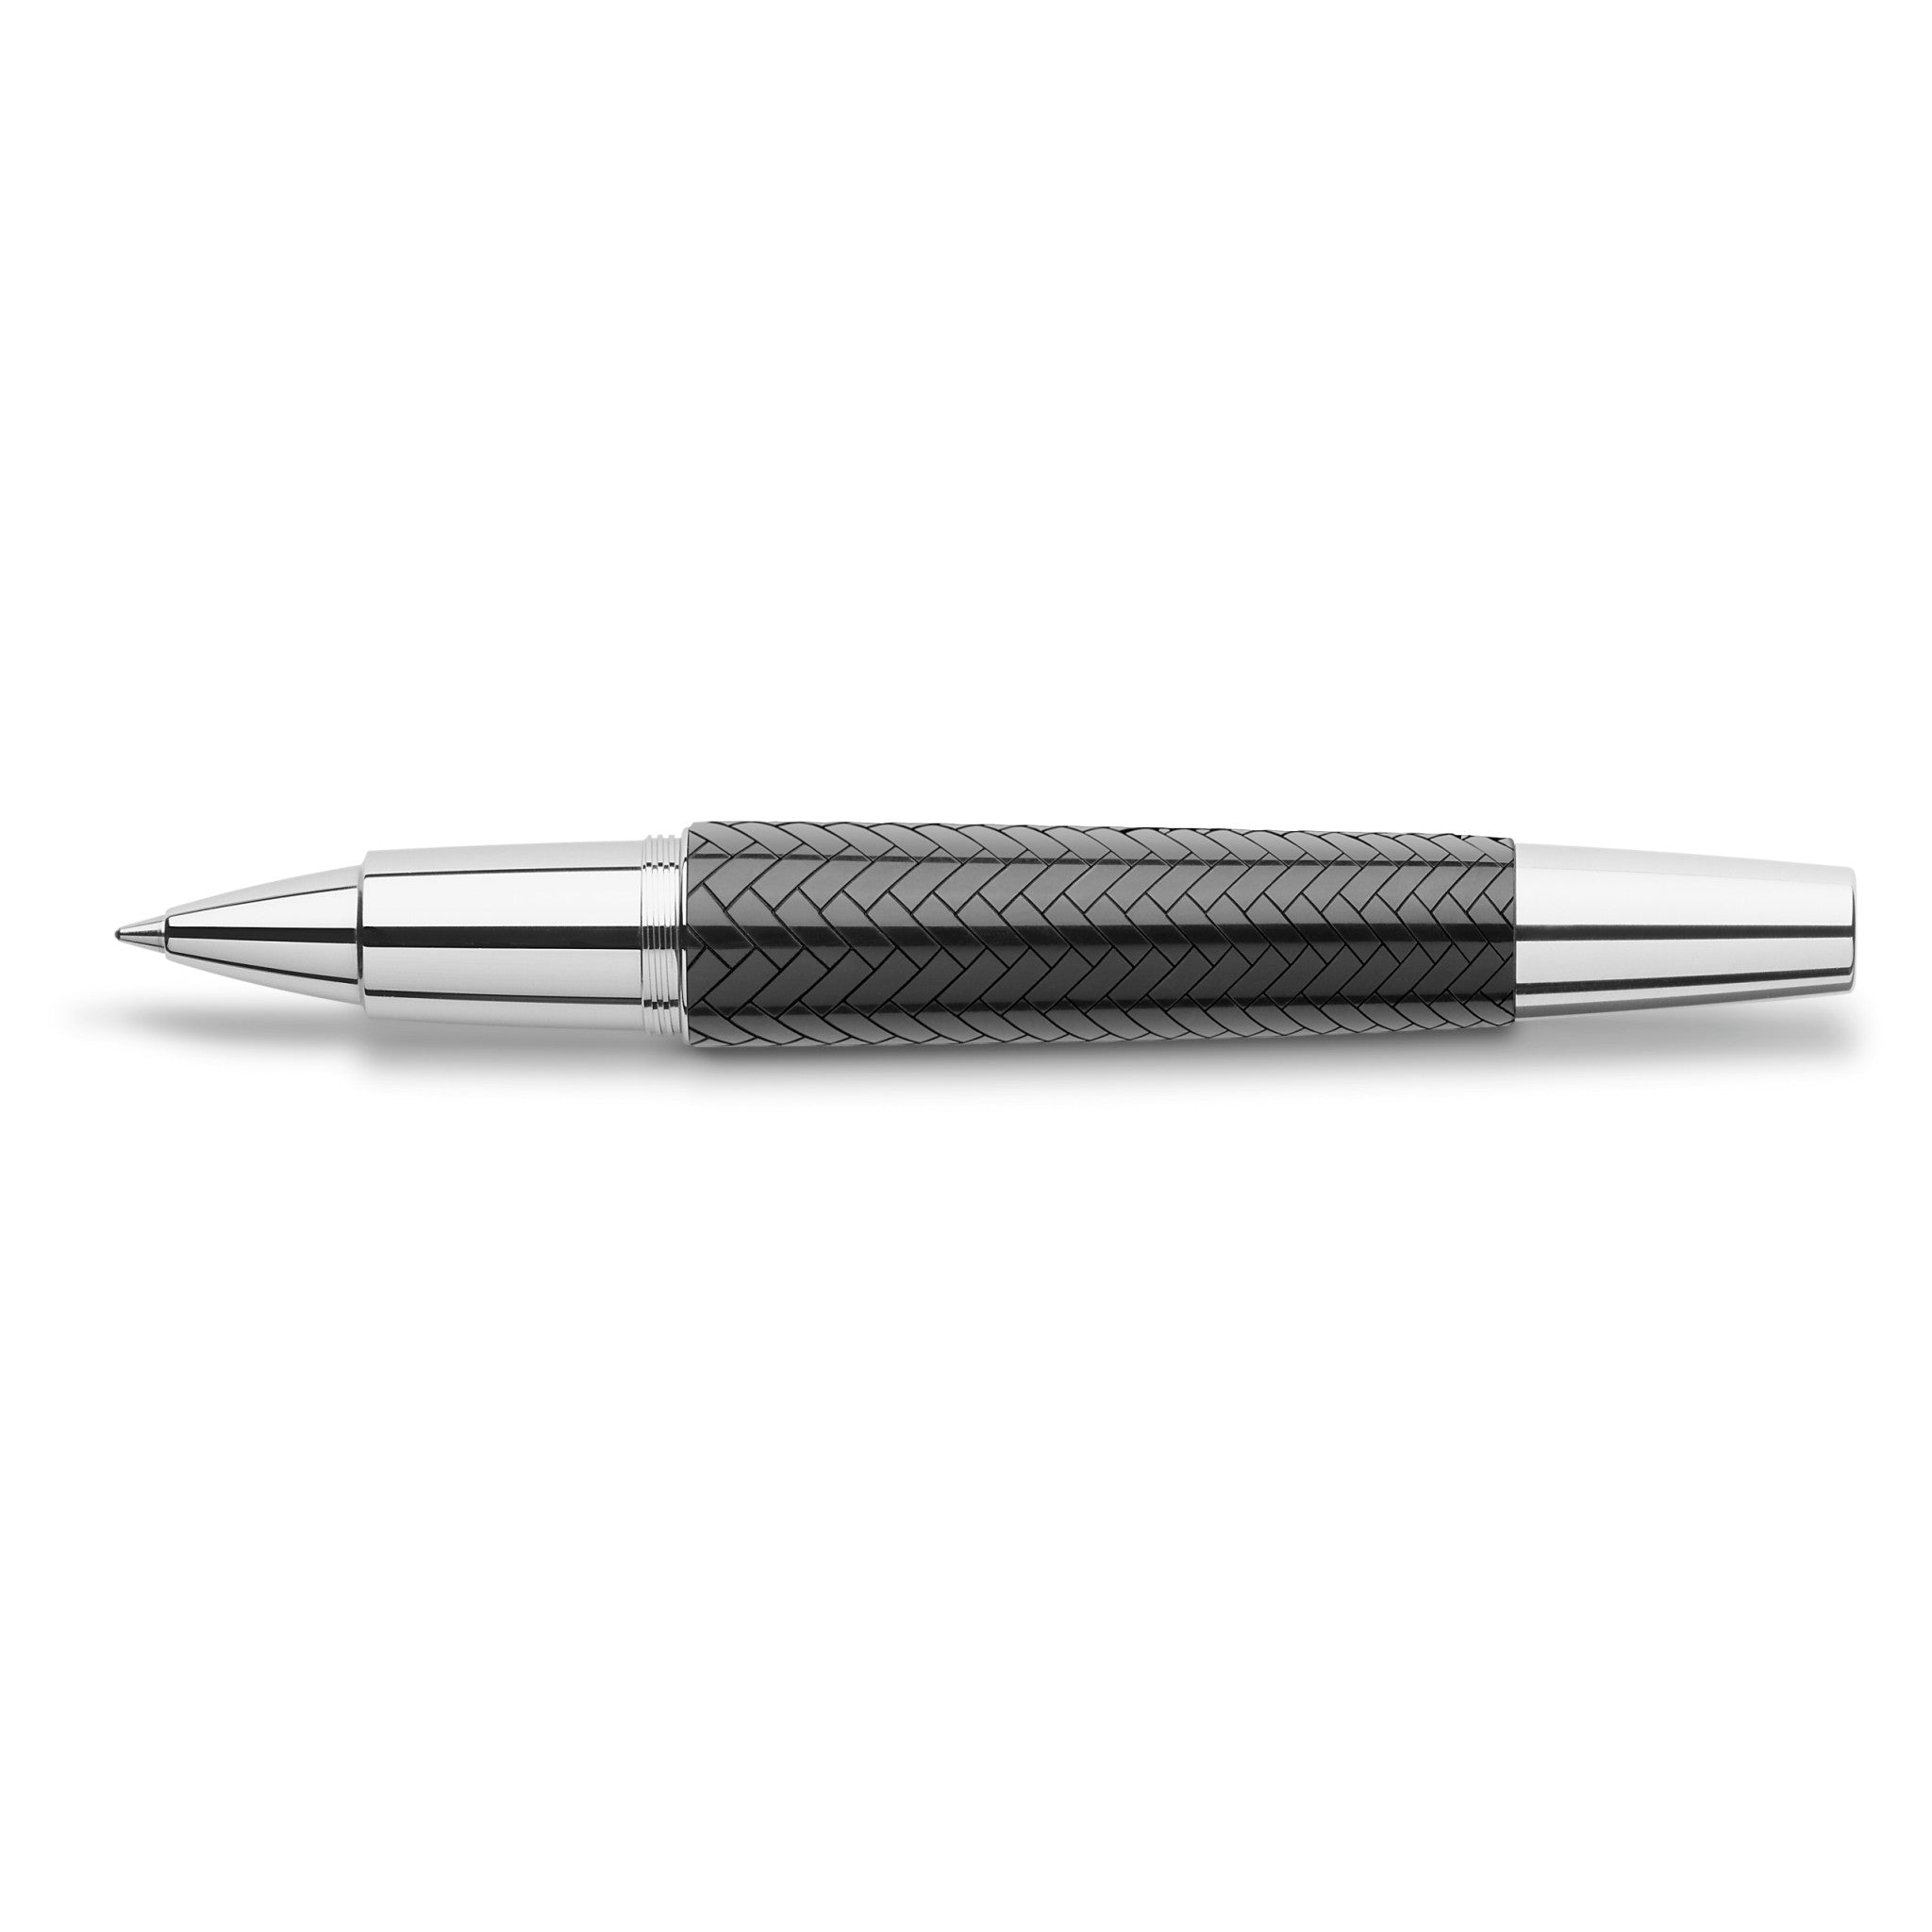 Faber-Castell E-motion rollerball: the King of Pens - Scrively